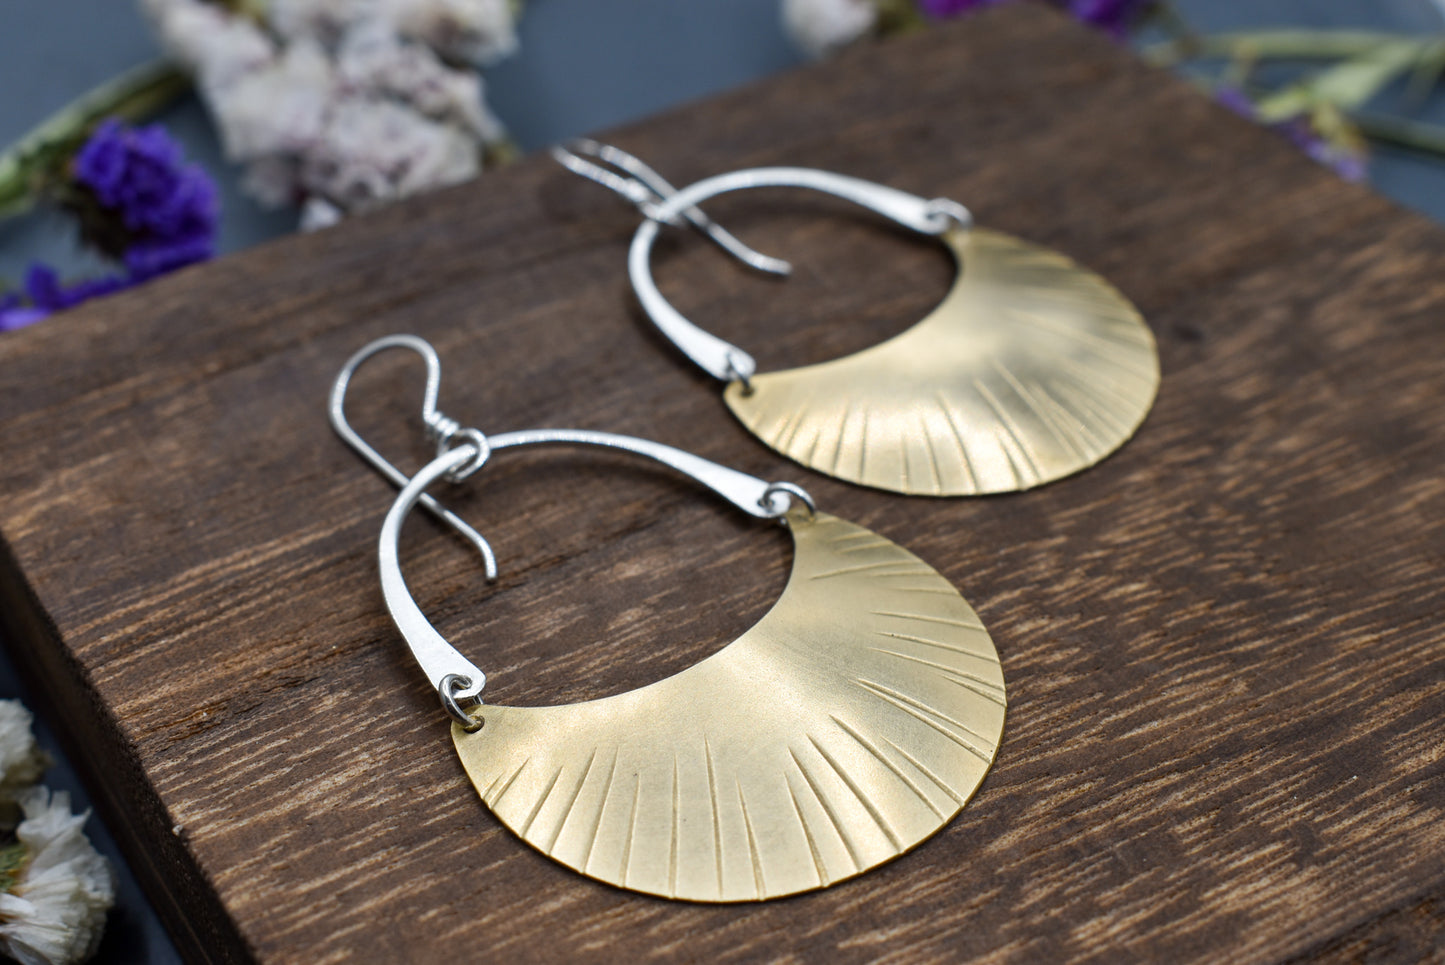 Dashed Crescent Moon Earrings - Brass